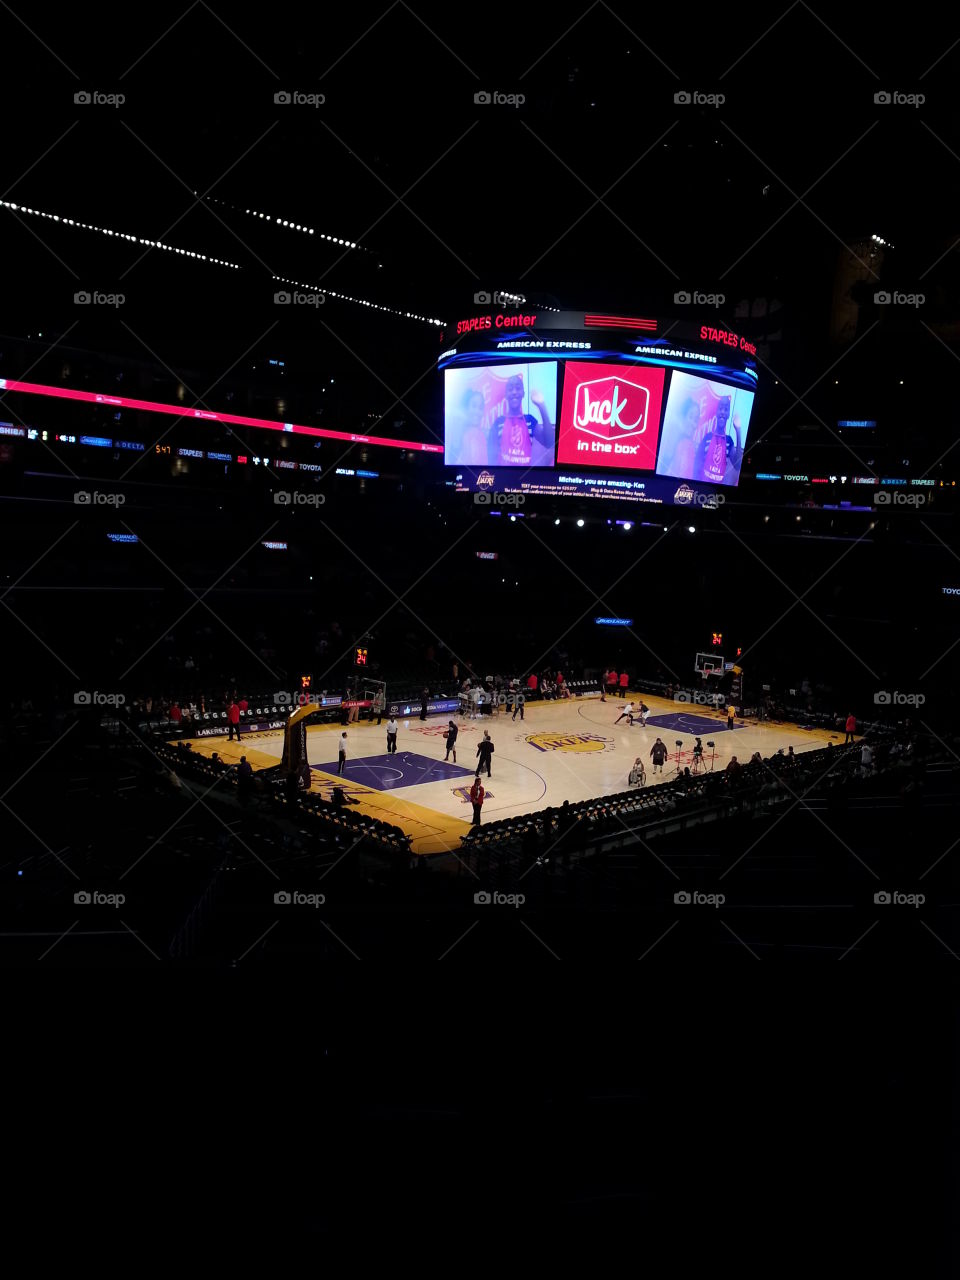 The Home Court. my first time watching nba live in staples center, LA